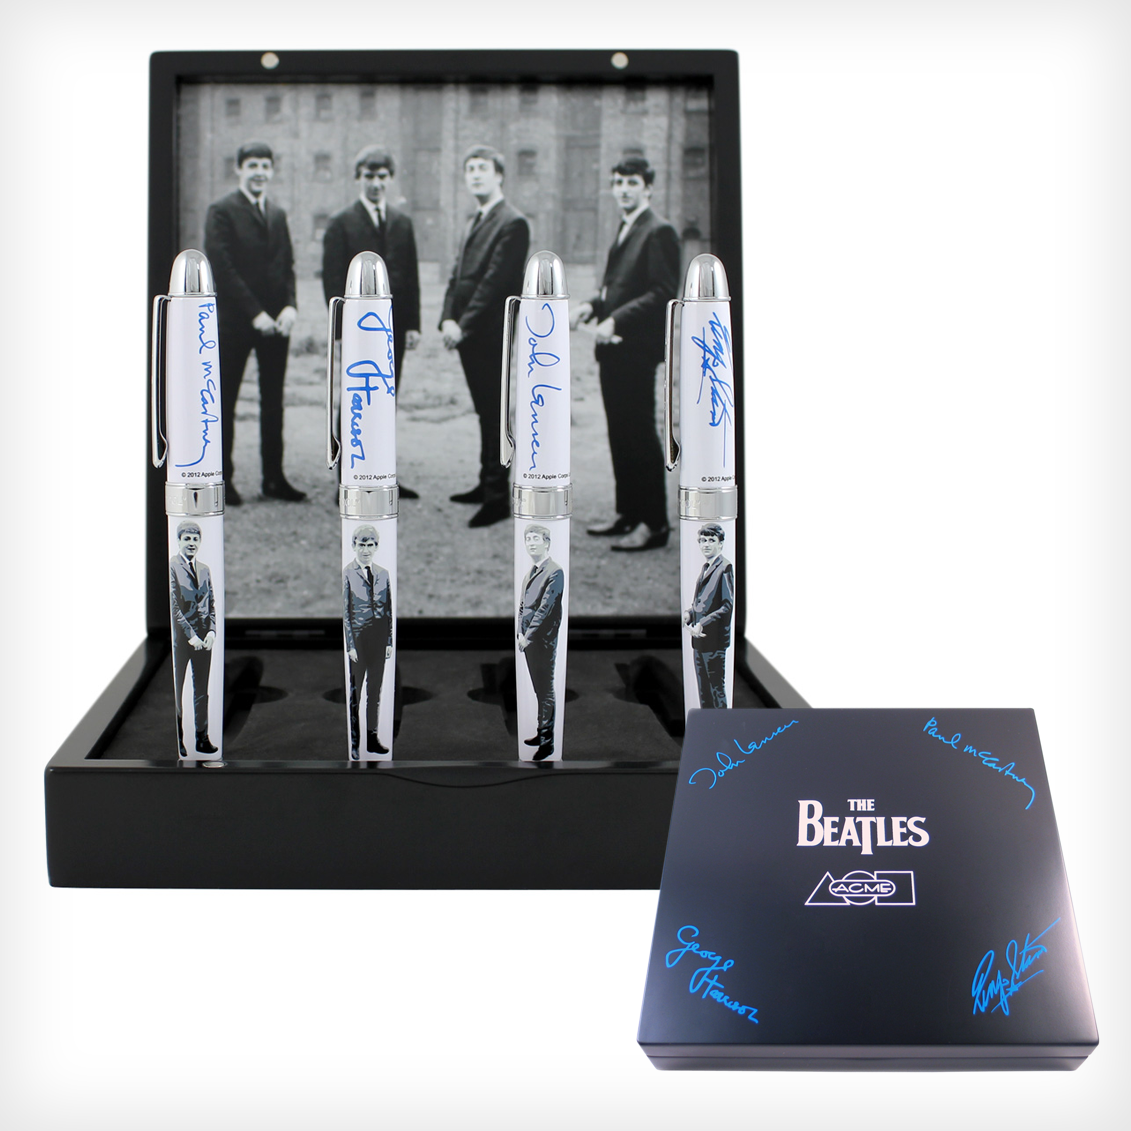 "Liverpool" Pen Set Packaging - The Beatles Collection